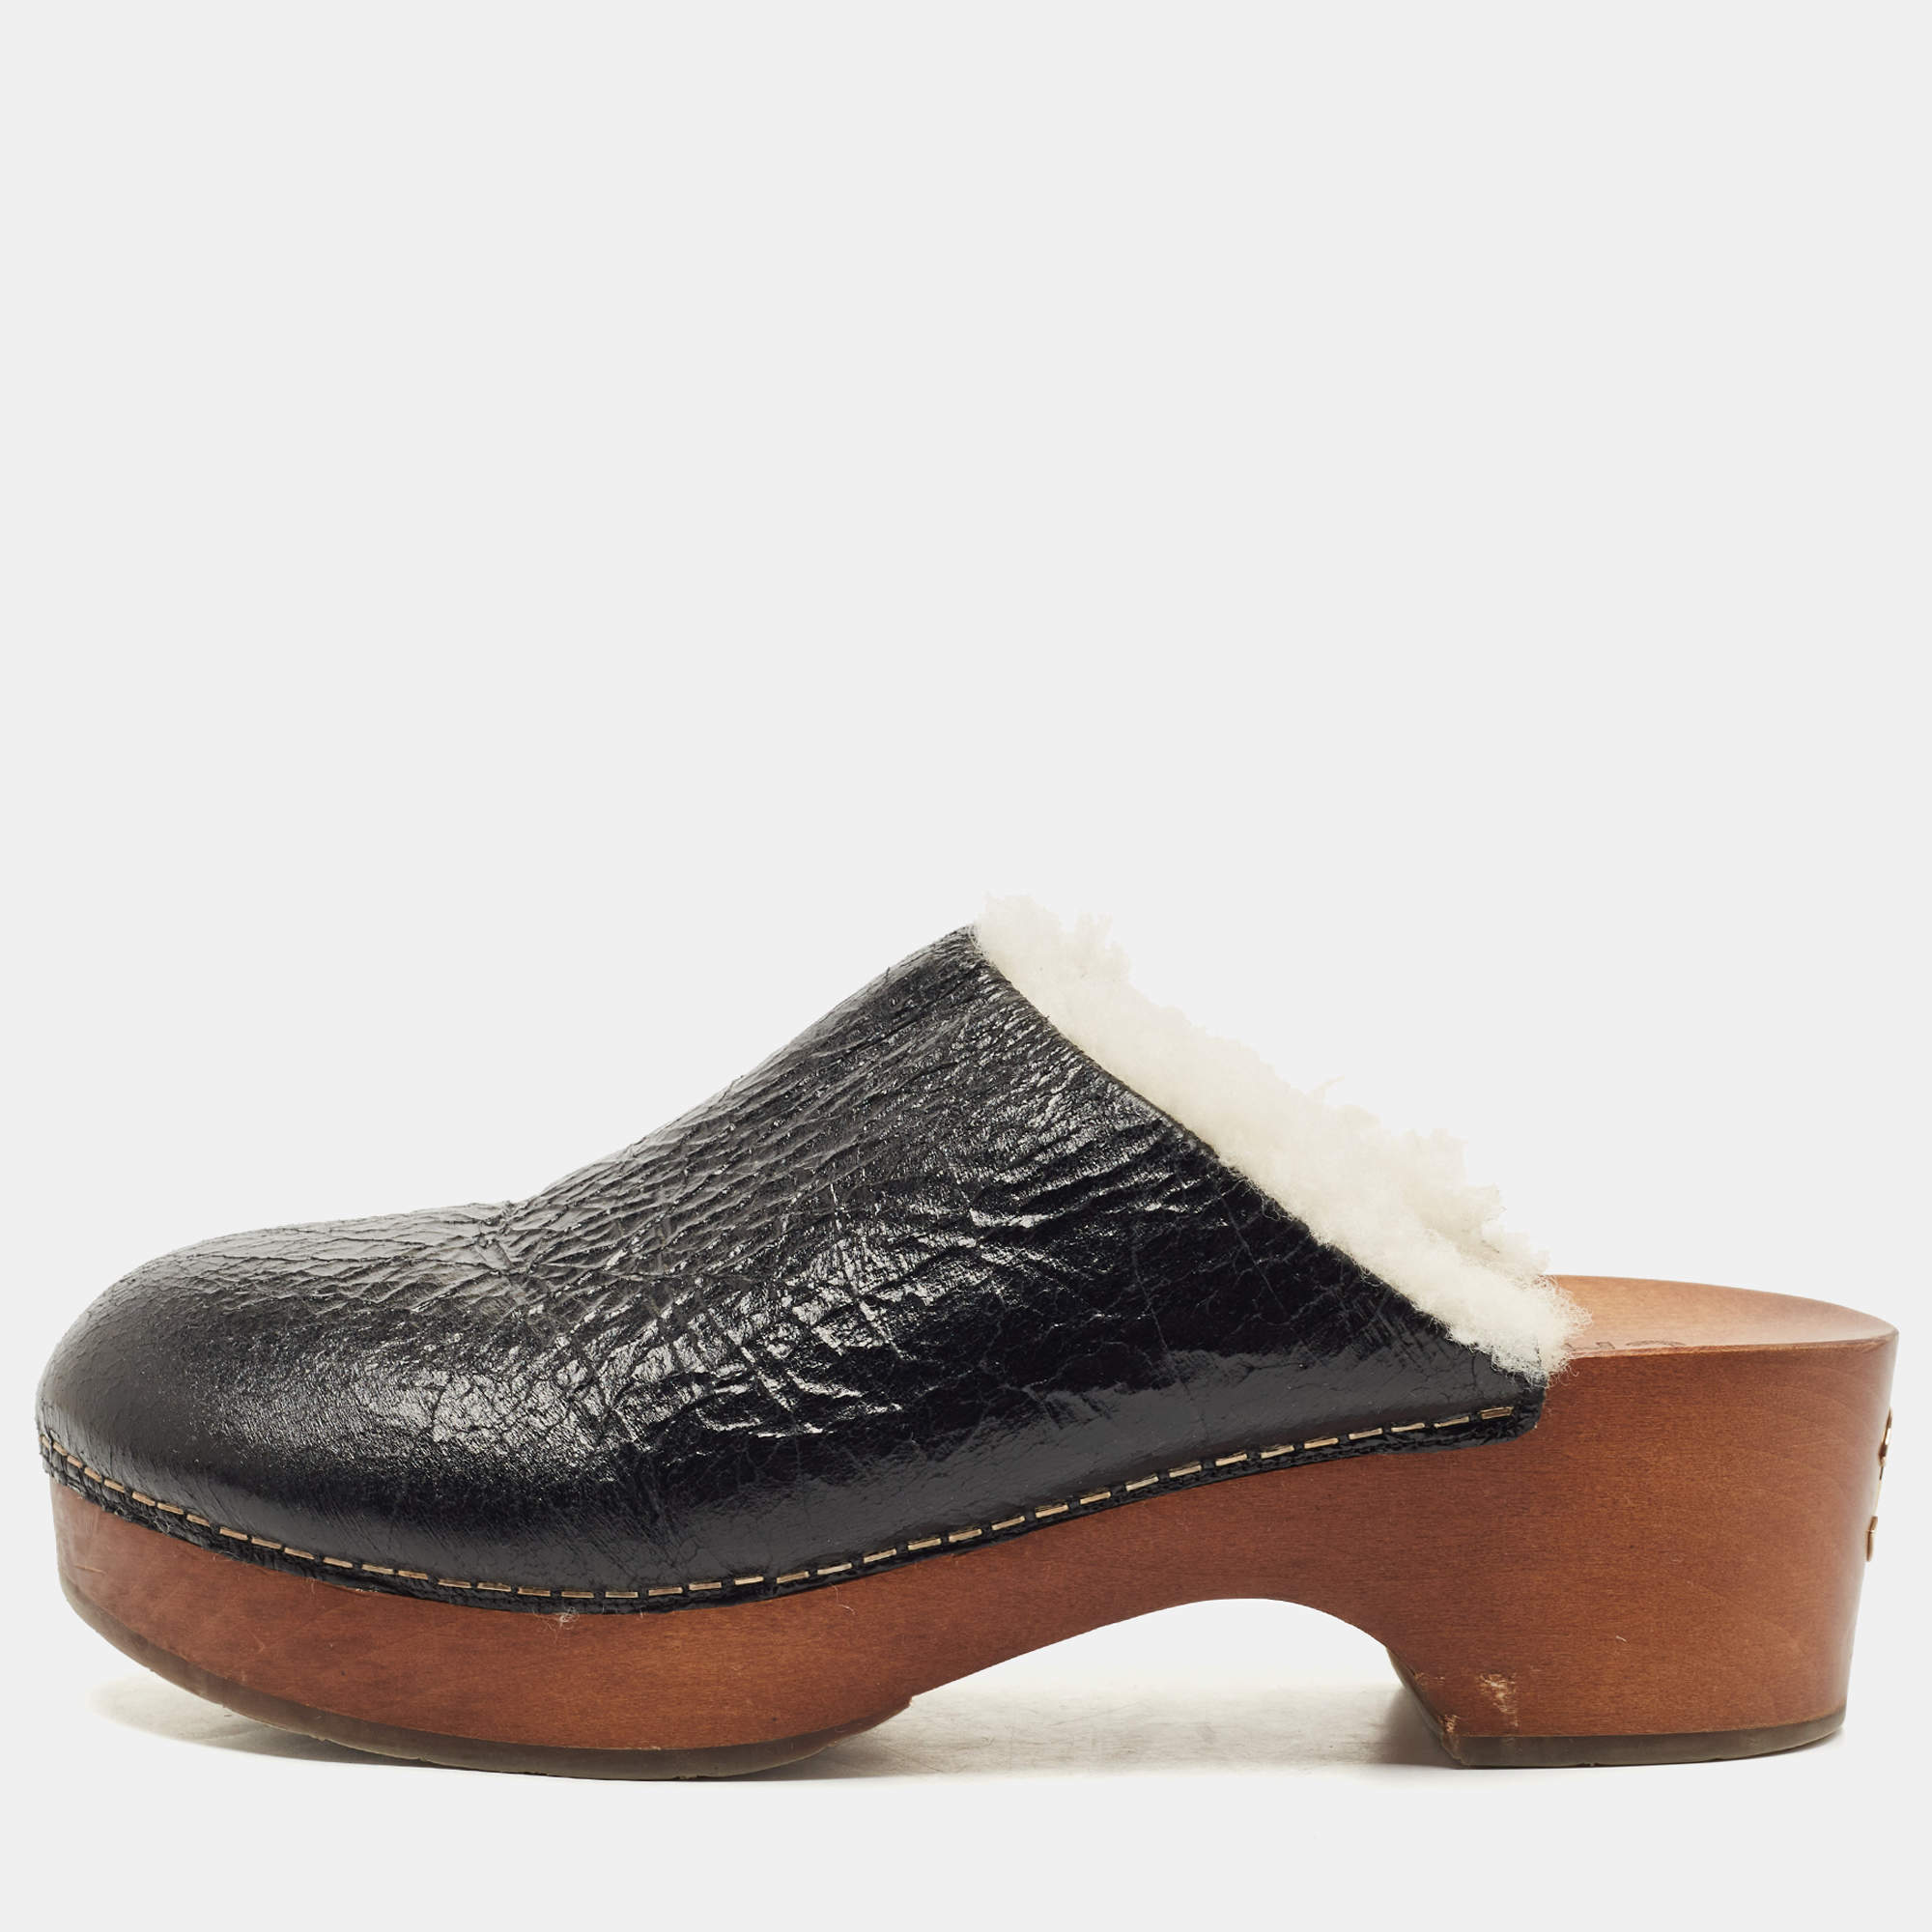 Chanel Black Leather Wooden Clogs Size 39 Chanel | The Luxury Closet